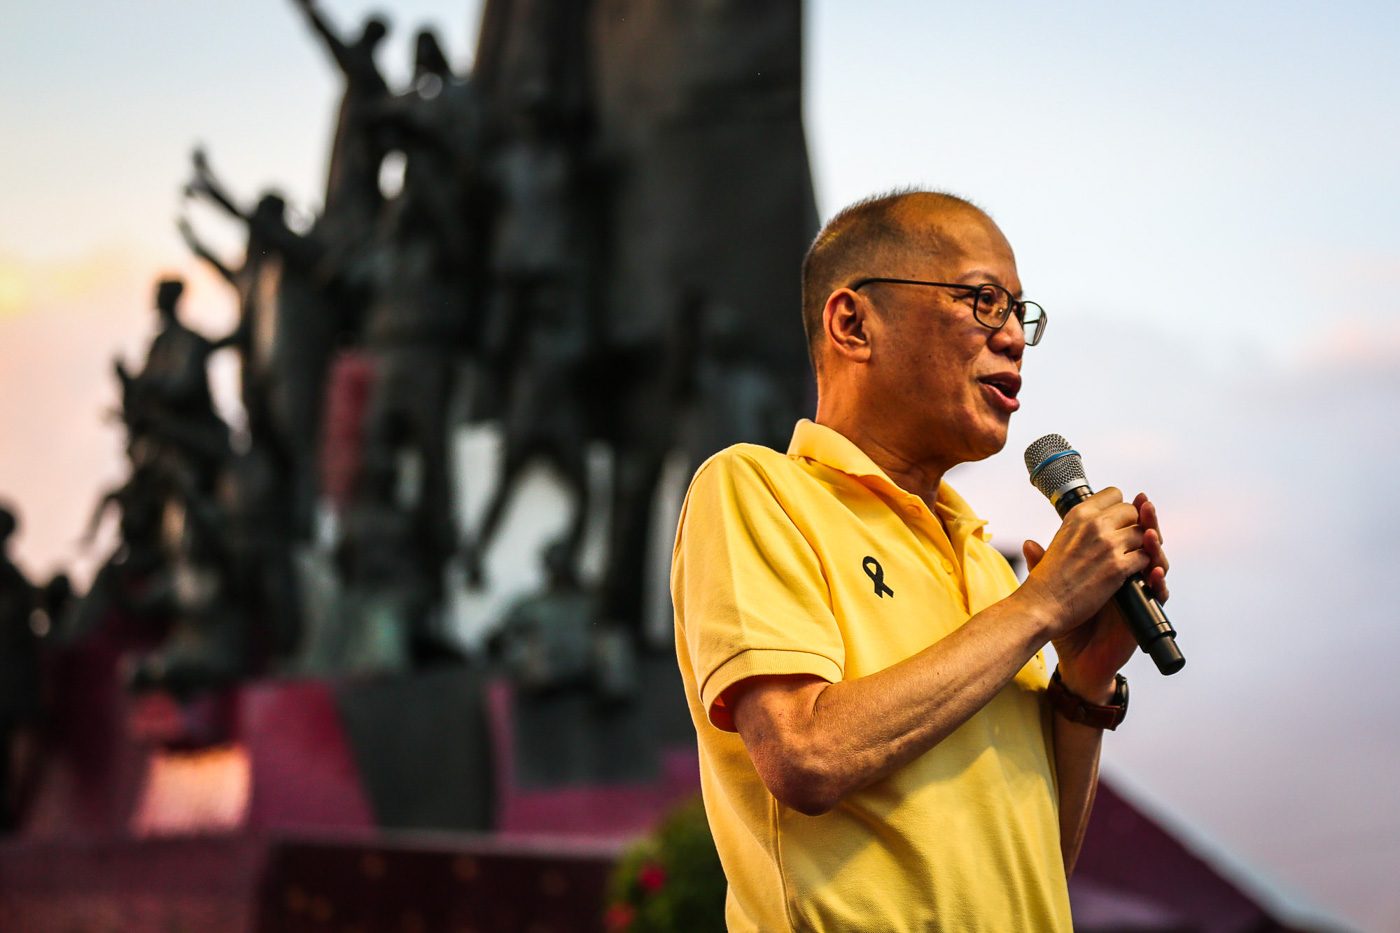 Aquino: Why not use cybercrime law to go after trolls, purveyors of fake news?